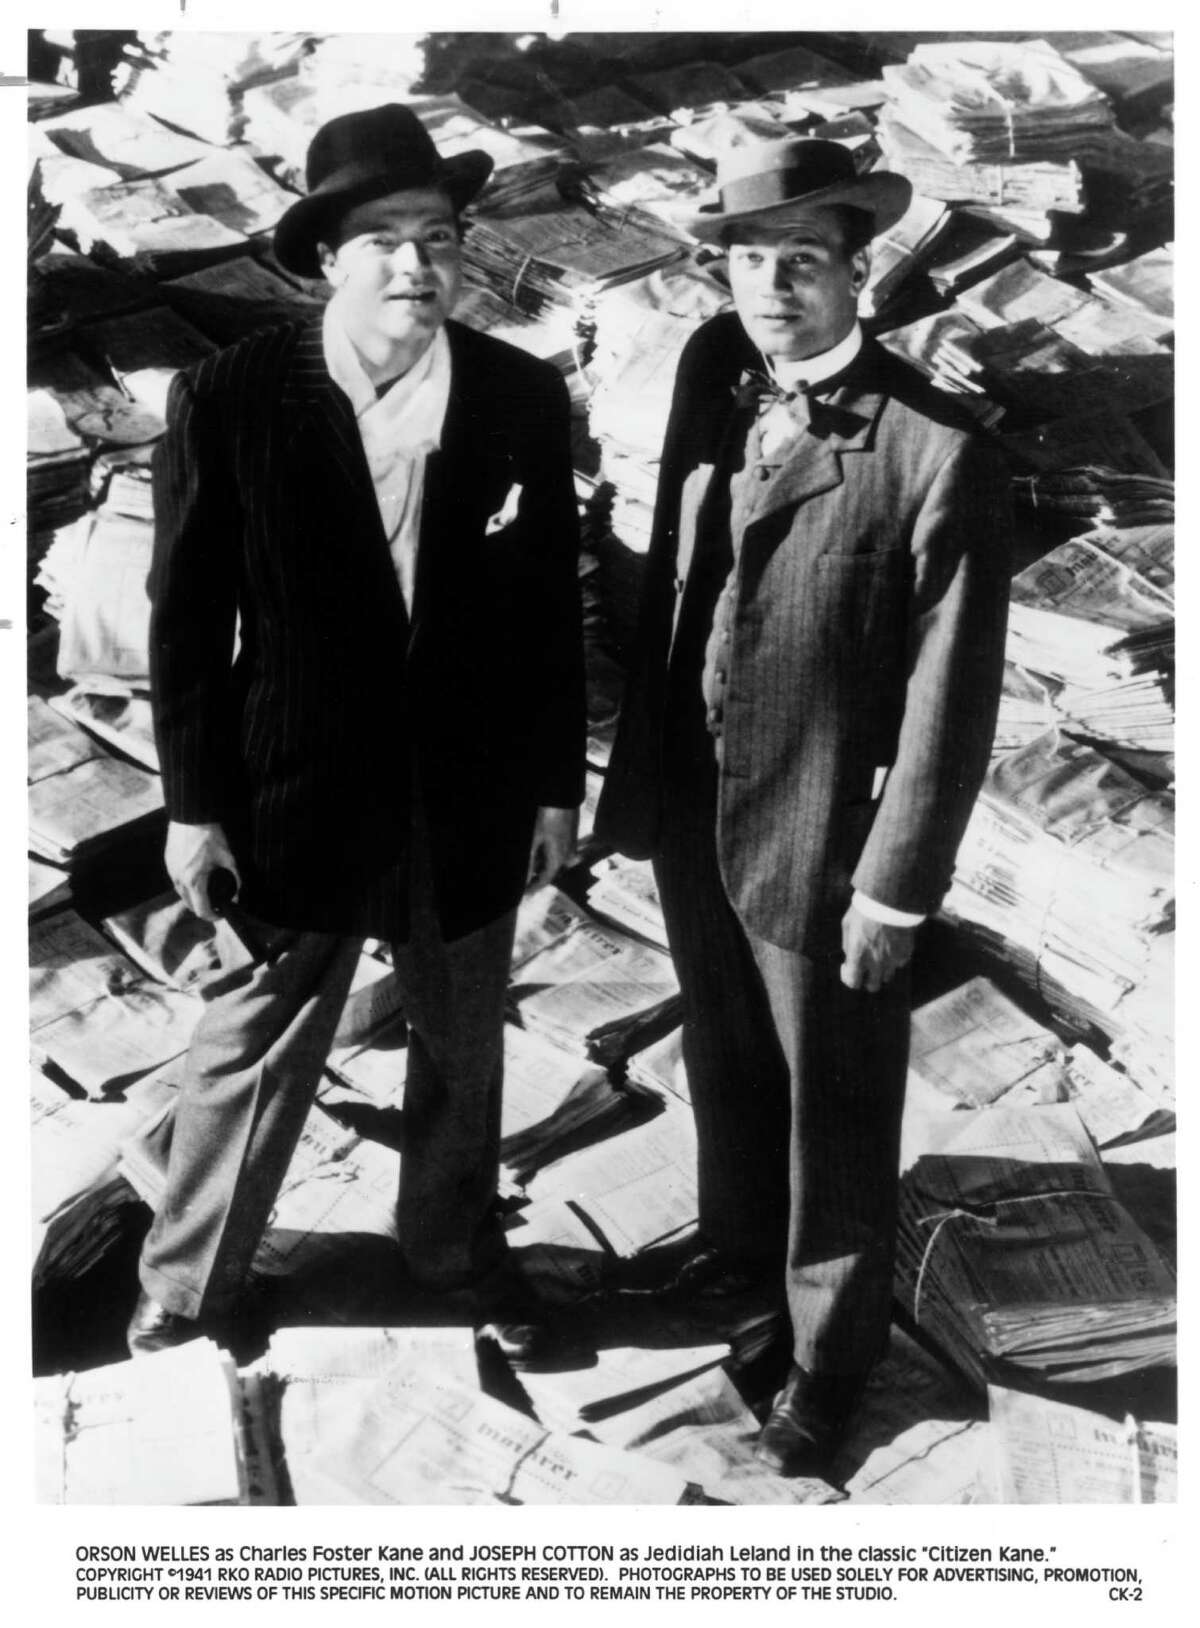 Orson Welles as Charles Foster Kane and JOSEPH COTTEN as Jedidiah Leland in the classic "Citizen Kane." HOUCHRON CAPTION (10/15/1998): ORSON WELLES DID TRIPLE DUTY AS WRITER, DIRECTOR AND STAR OF "CITIZEN KANE."